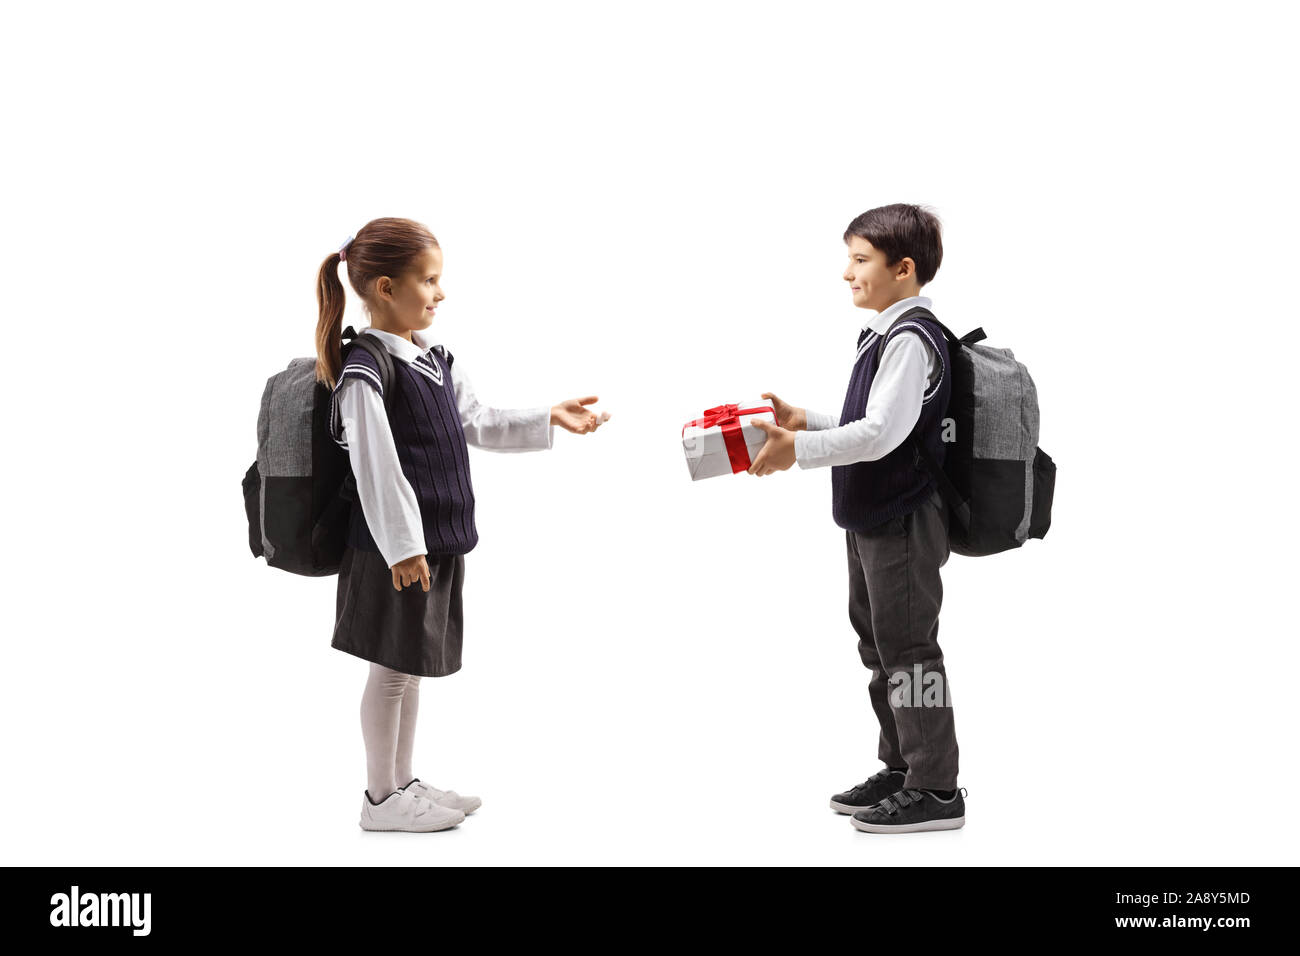 Full length profile shot of a schoolboy giving apresent to a schoolgirl isolated on white background Stock Photo